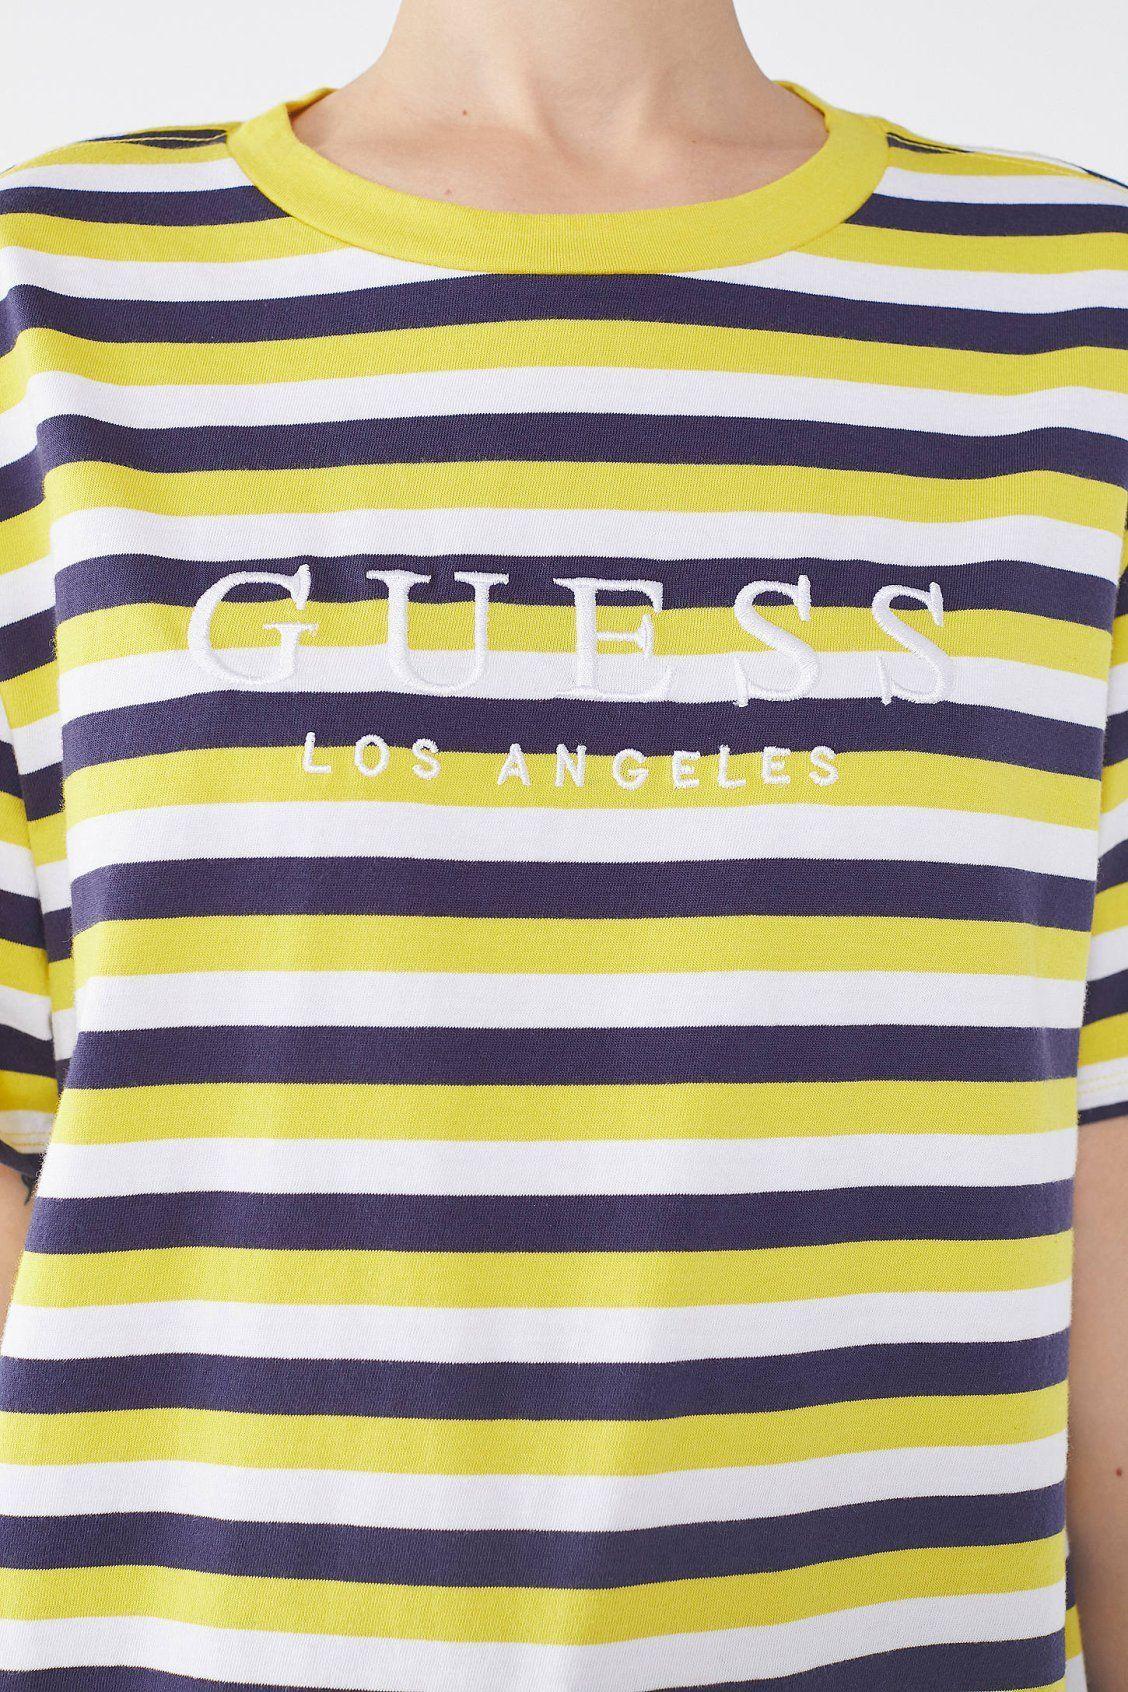 Yellow Striped Logo - GUESS + UO Striped Logo Tee. Tees. Tees, Urban outfitters, Outfits